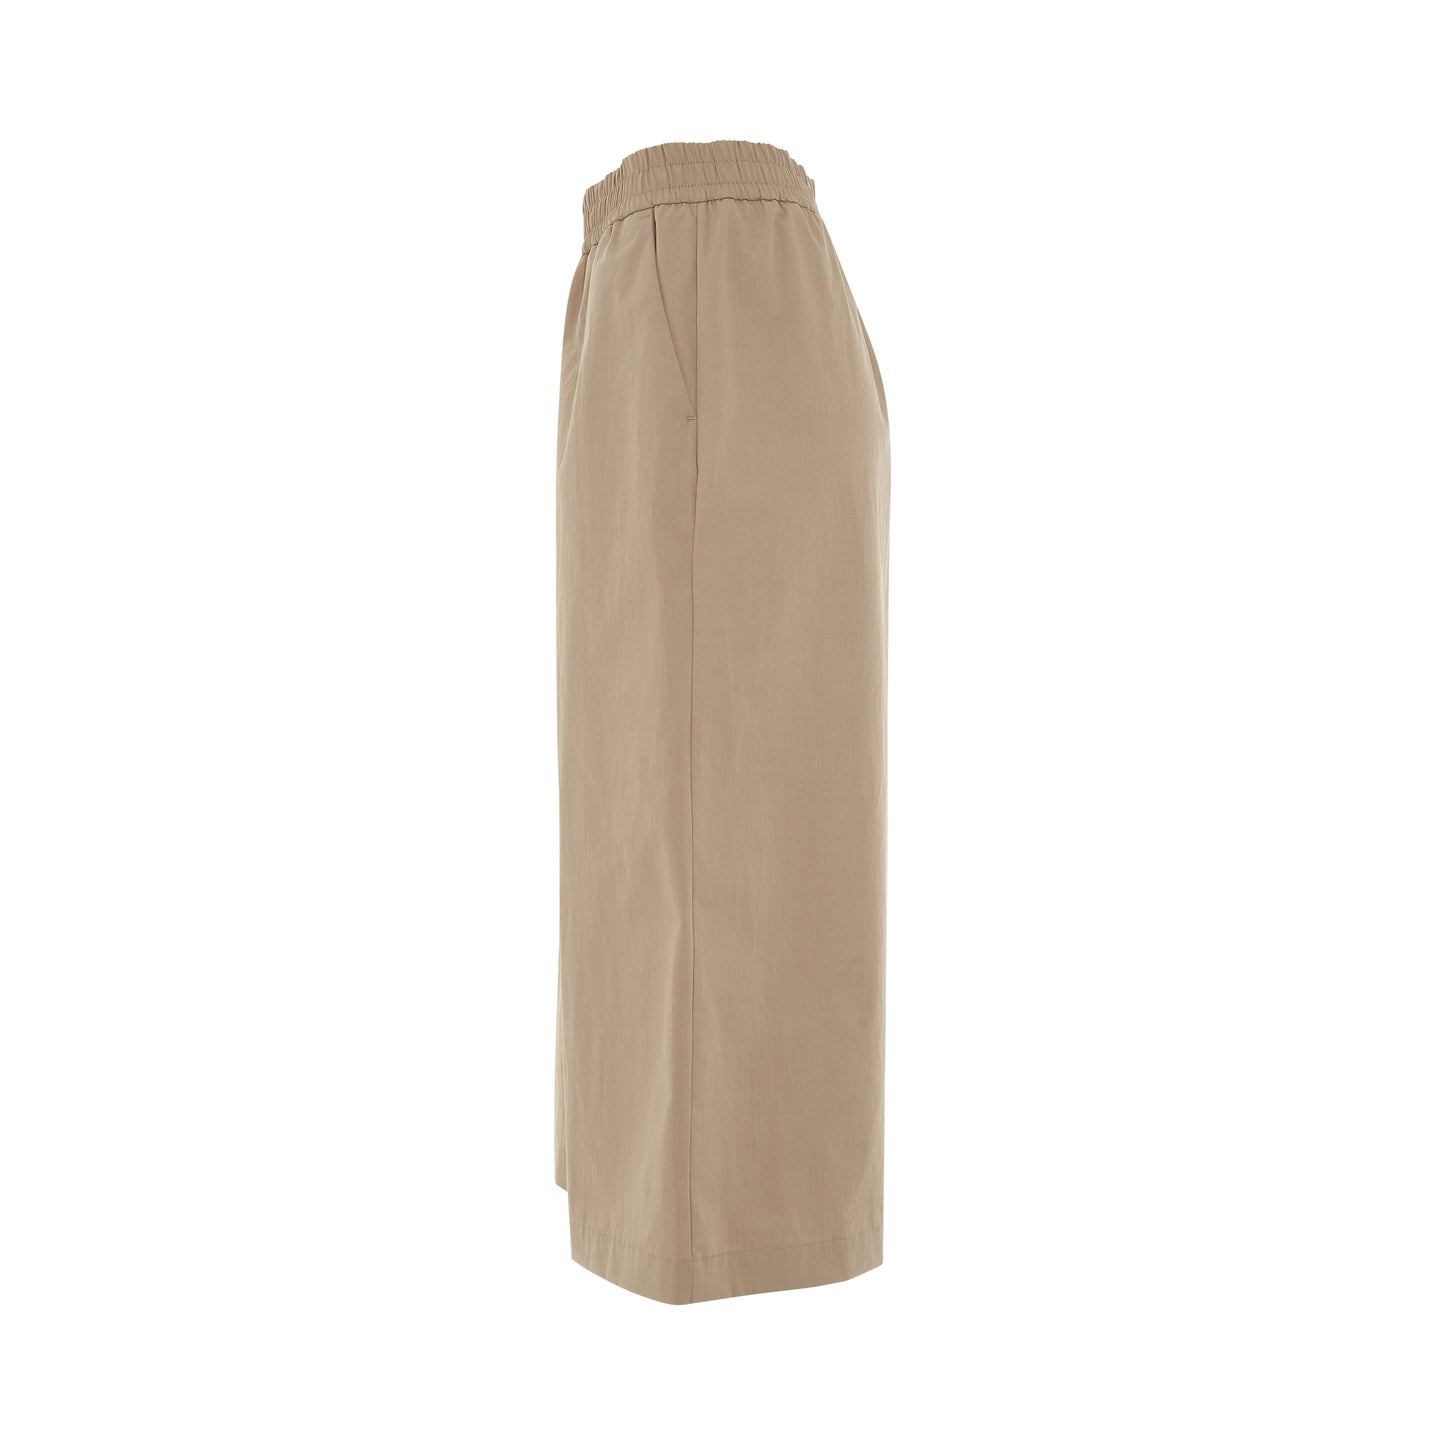 Cropped Cotton Trousers in Sandstone